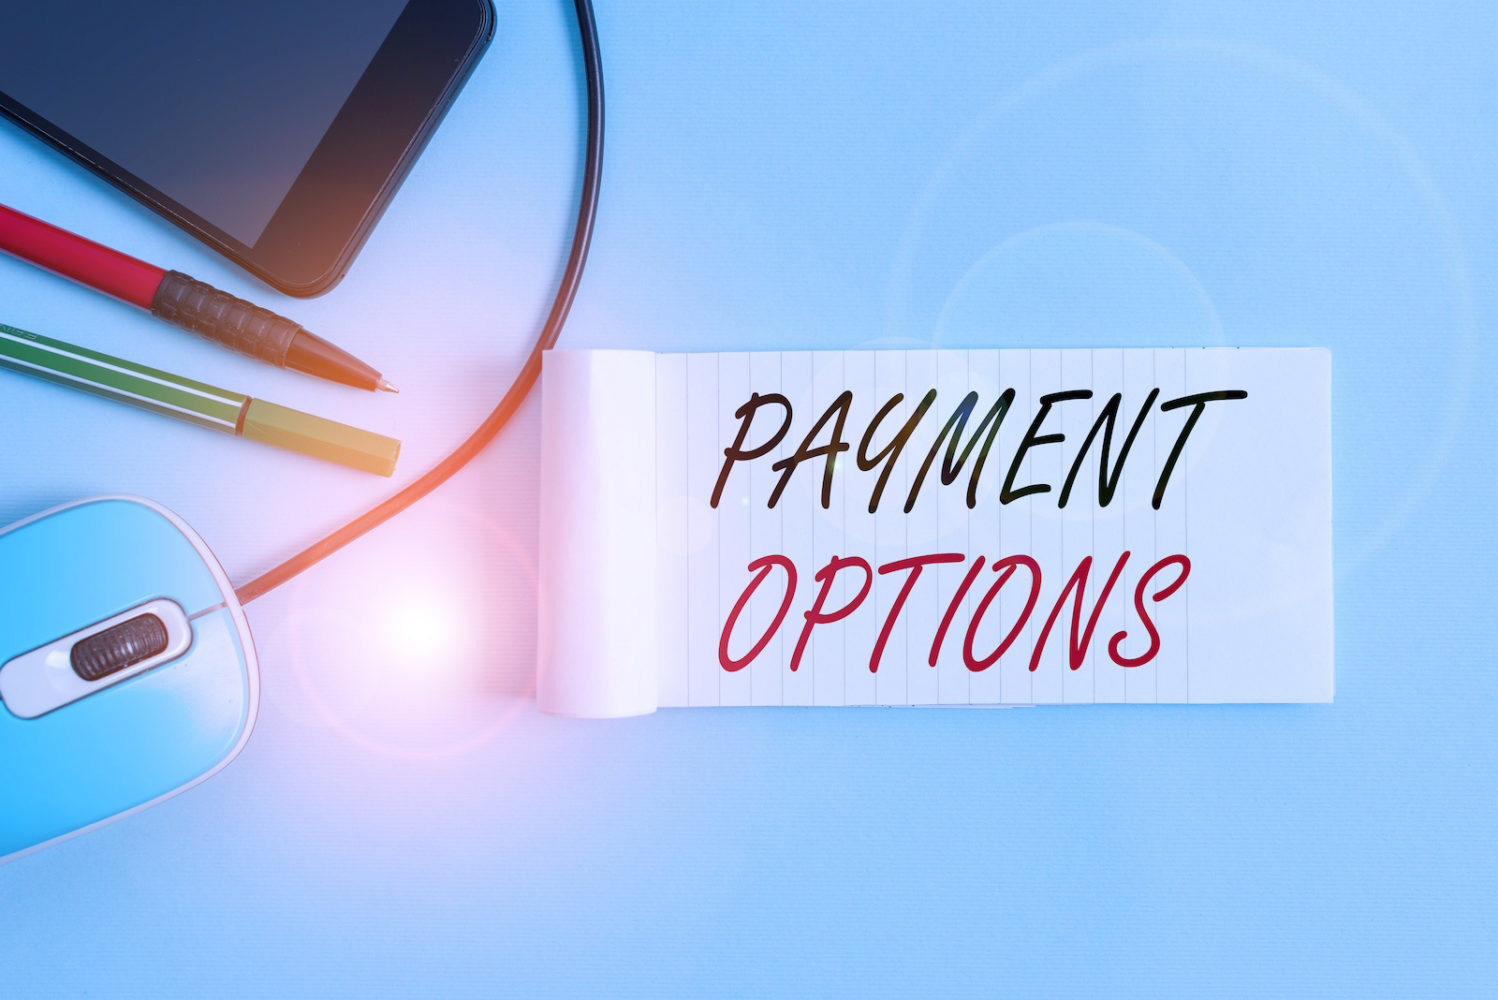 Business Insurance Payment Options - ALIGNED Insurance Brokers